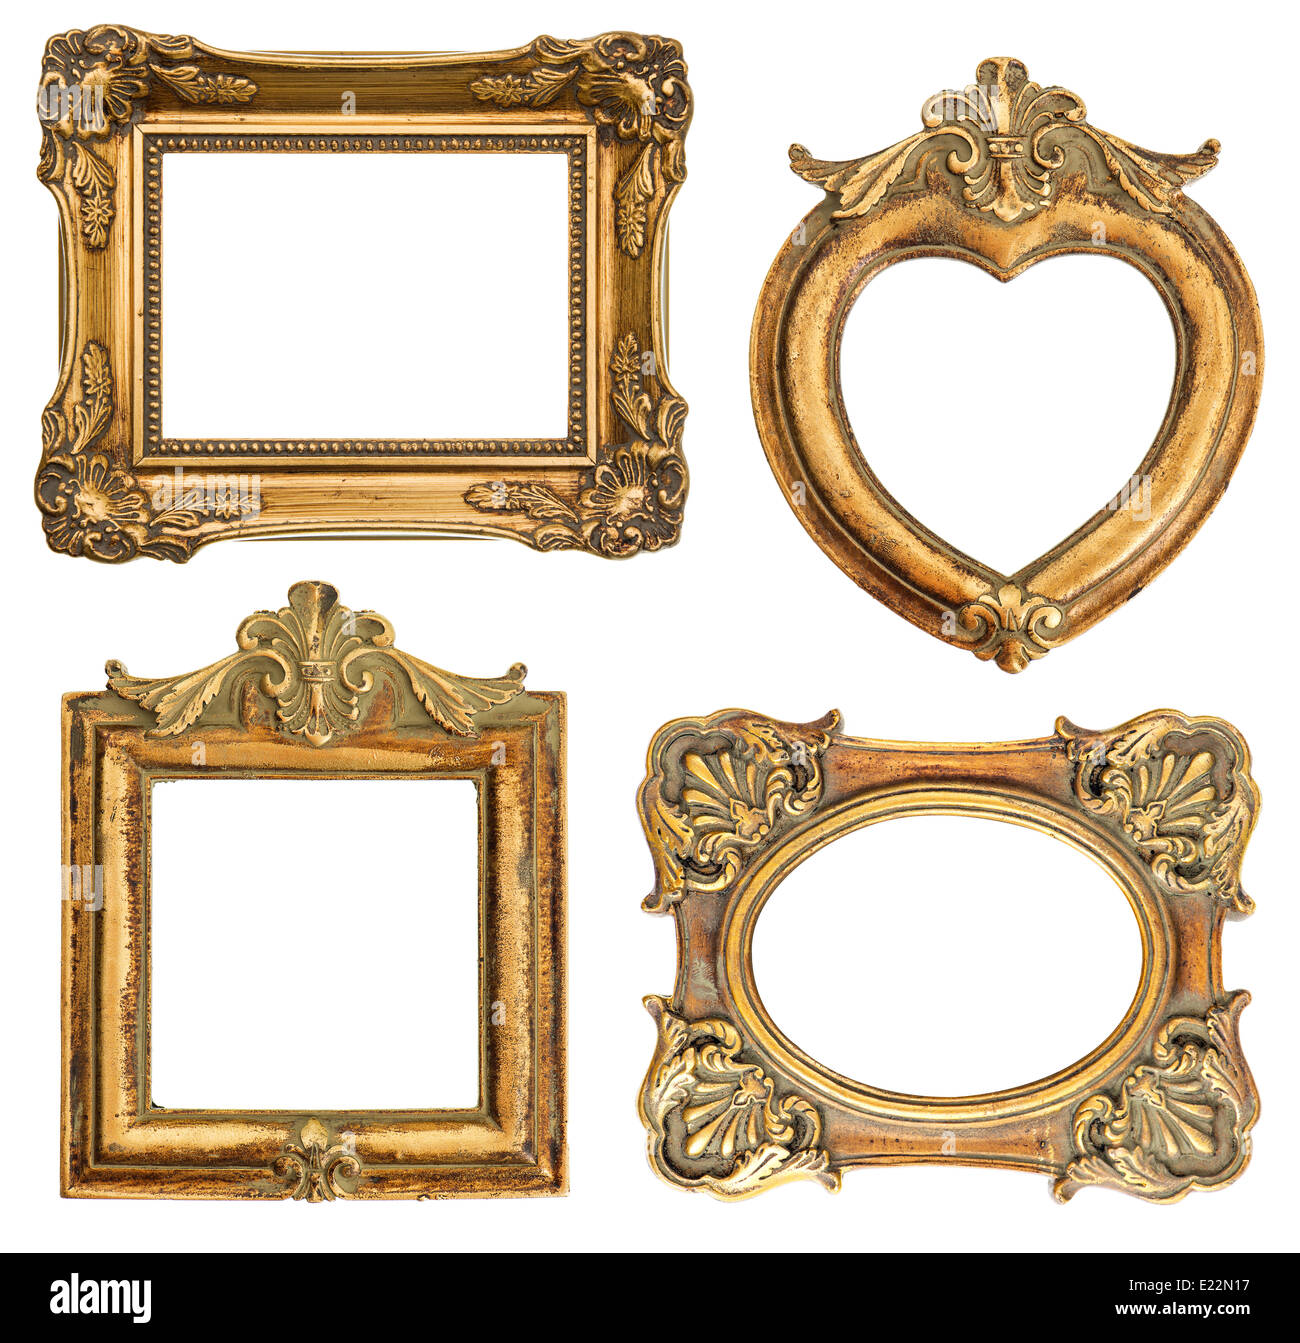 old golden frames for your picture, phiti, image. antique object. vintage background Stock Photo